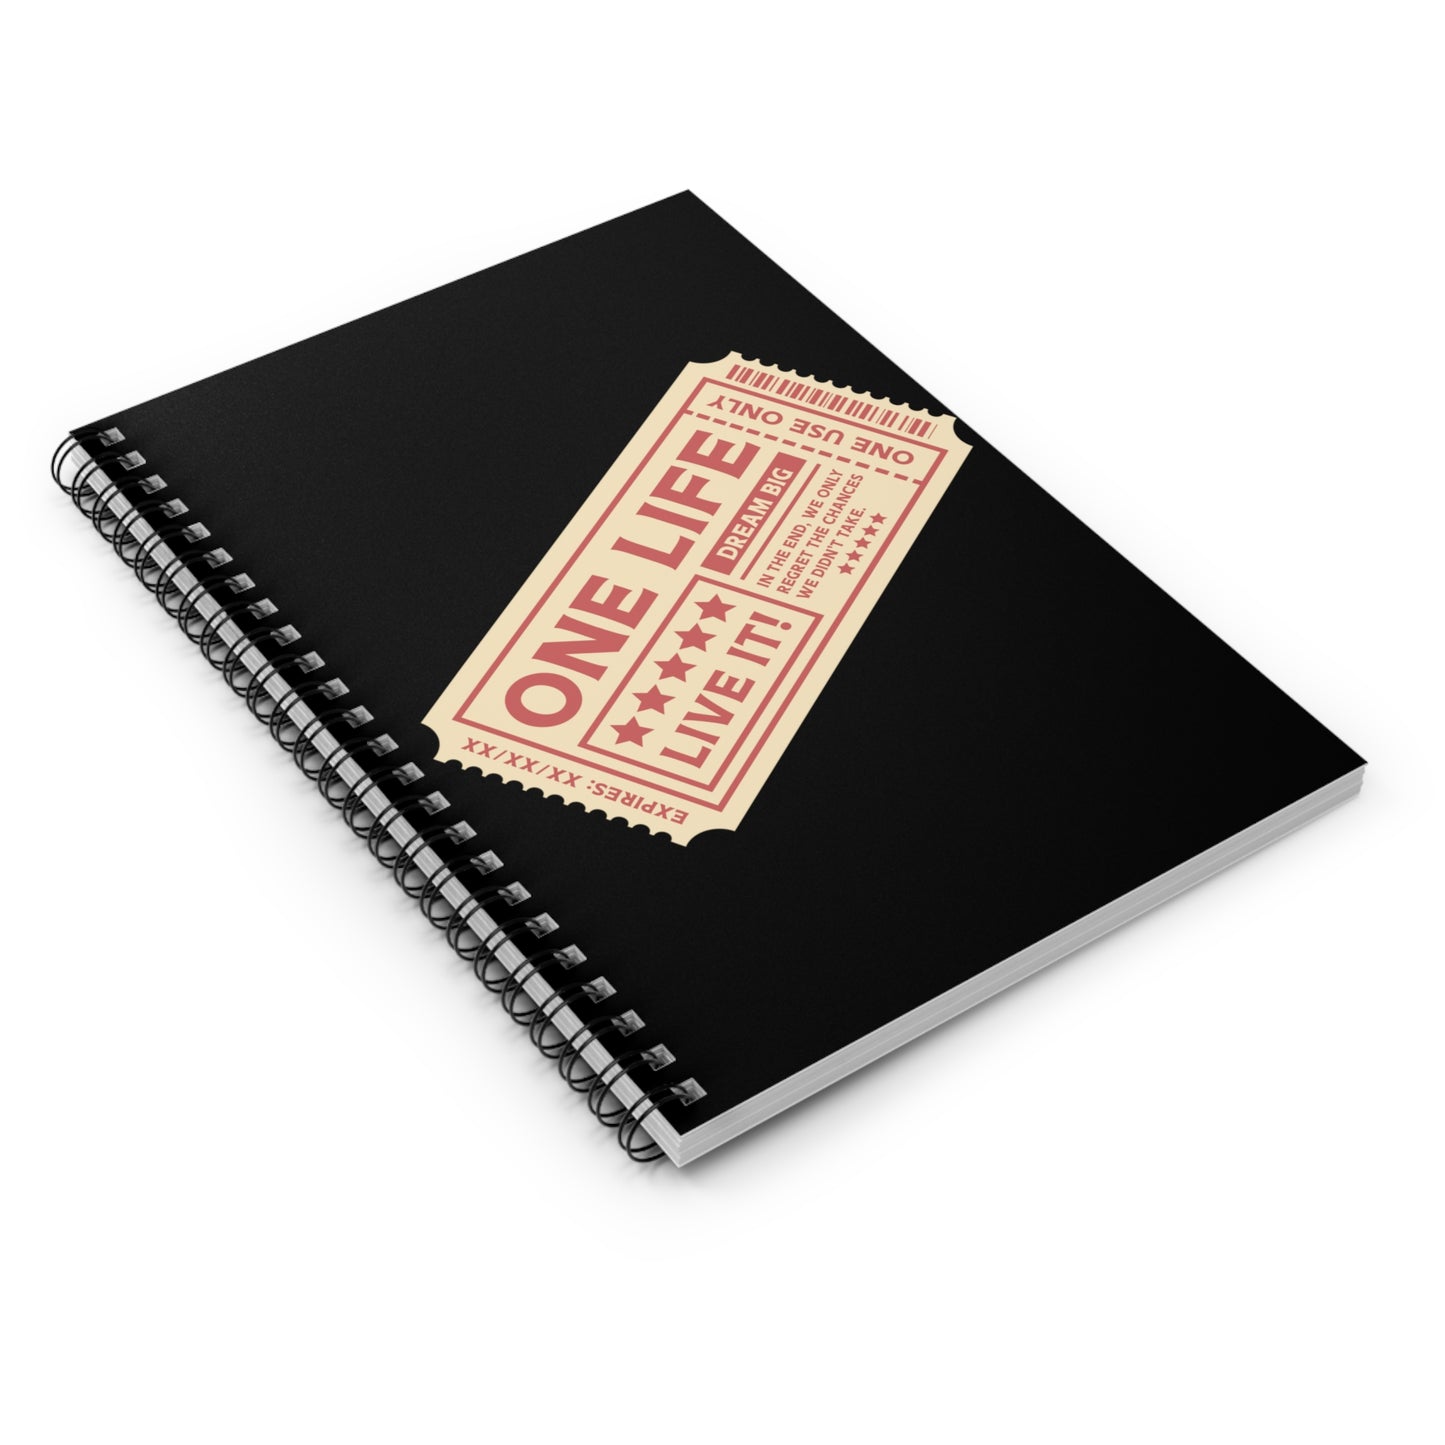 Ticket to Life: Spiral Notebook - Log Books - Journals - Diaries - and More Custom Printed by TheGlassyLass.com